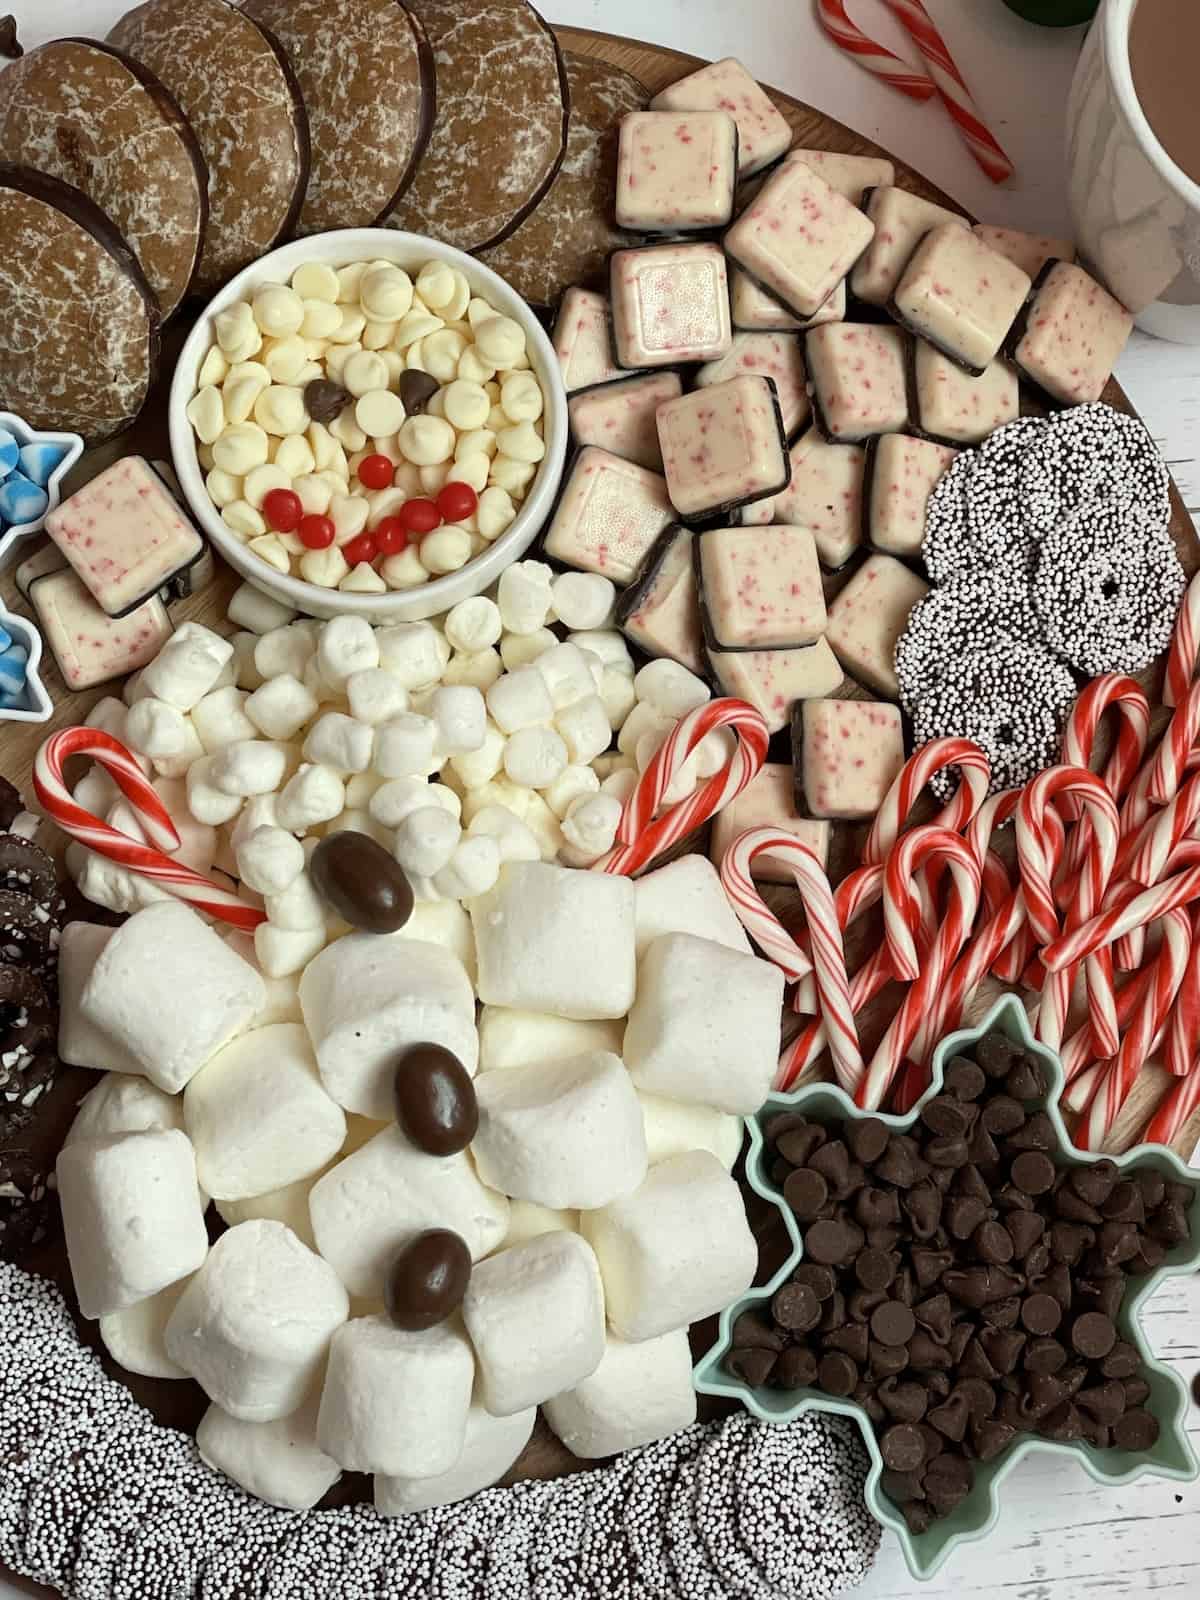 a hot chocolate charcuterie board made of marshmallows and white chocolate chips designed in a snowman shape surrounded by candy canes, cookies, and pretzels on a wooden serving board